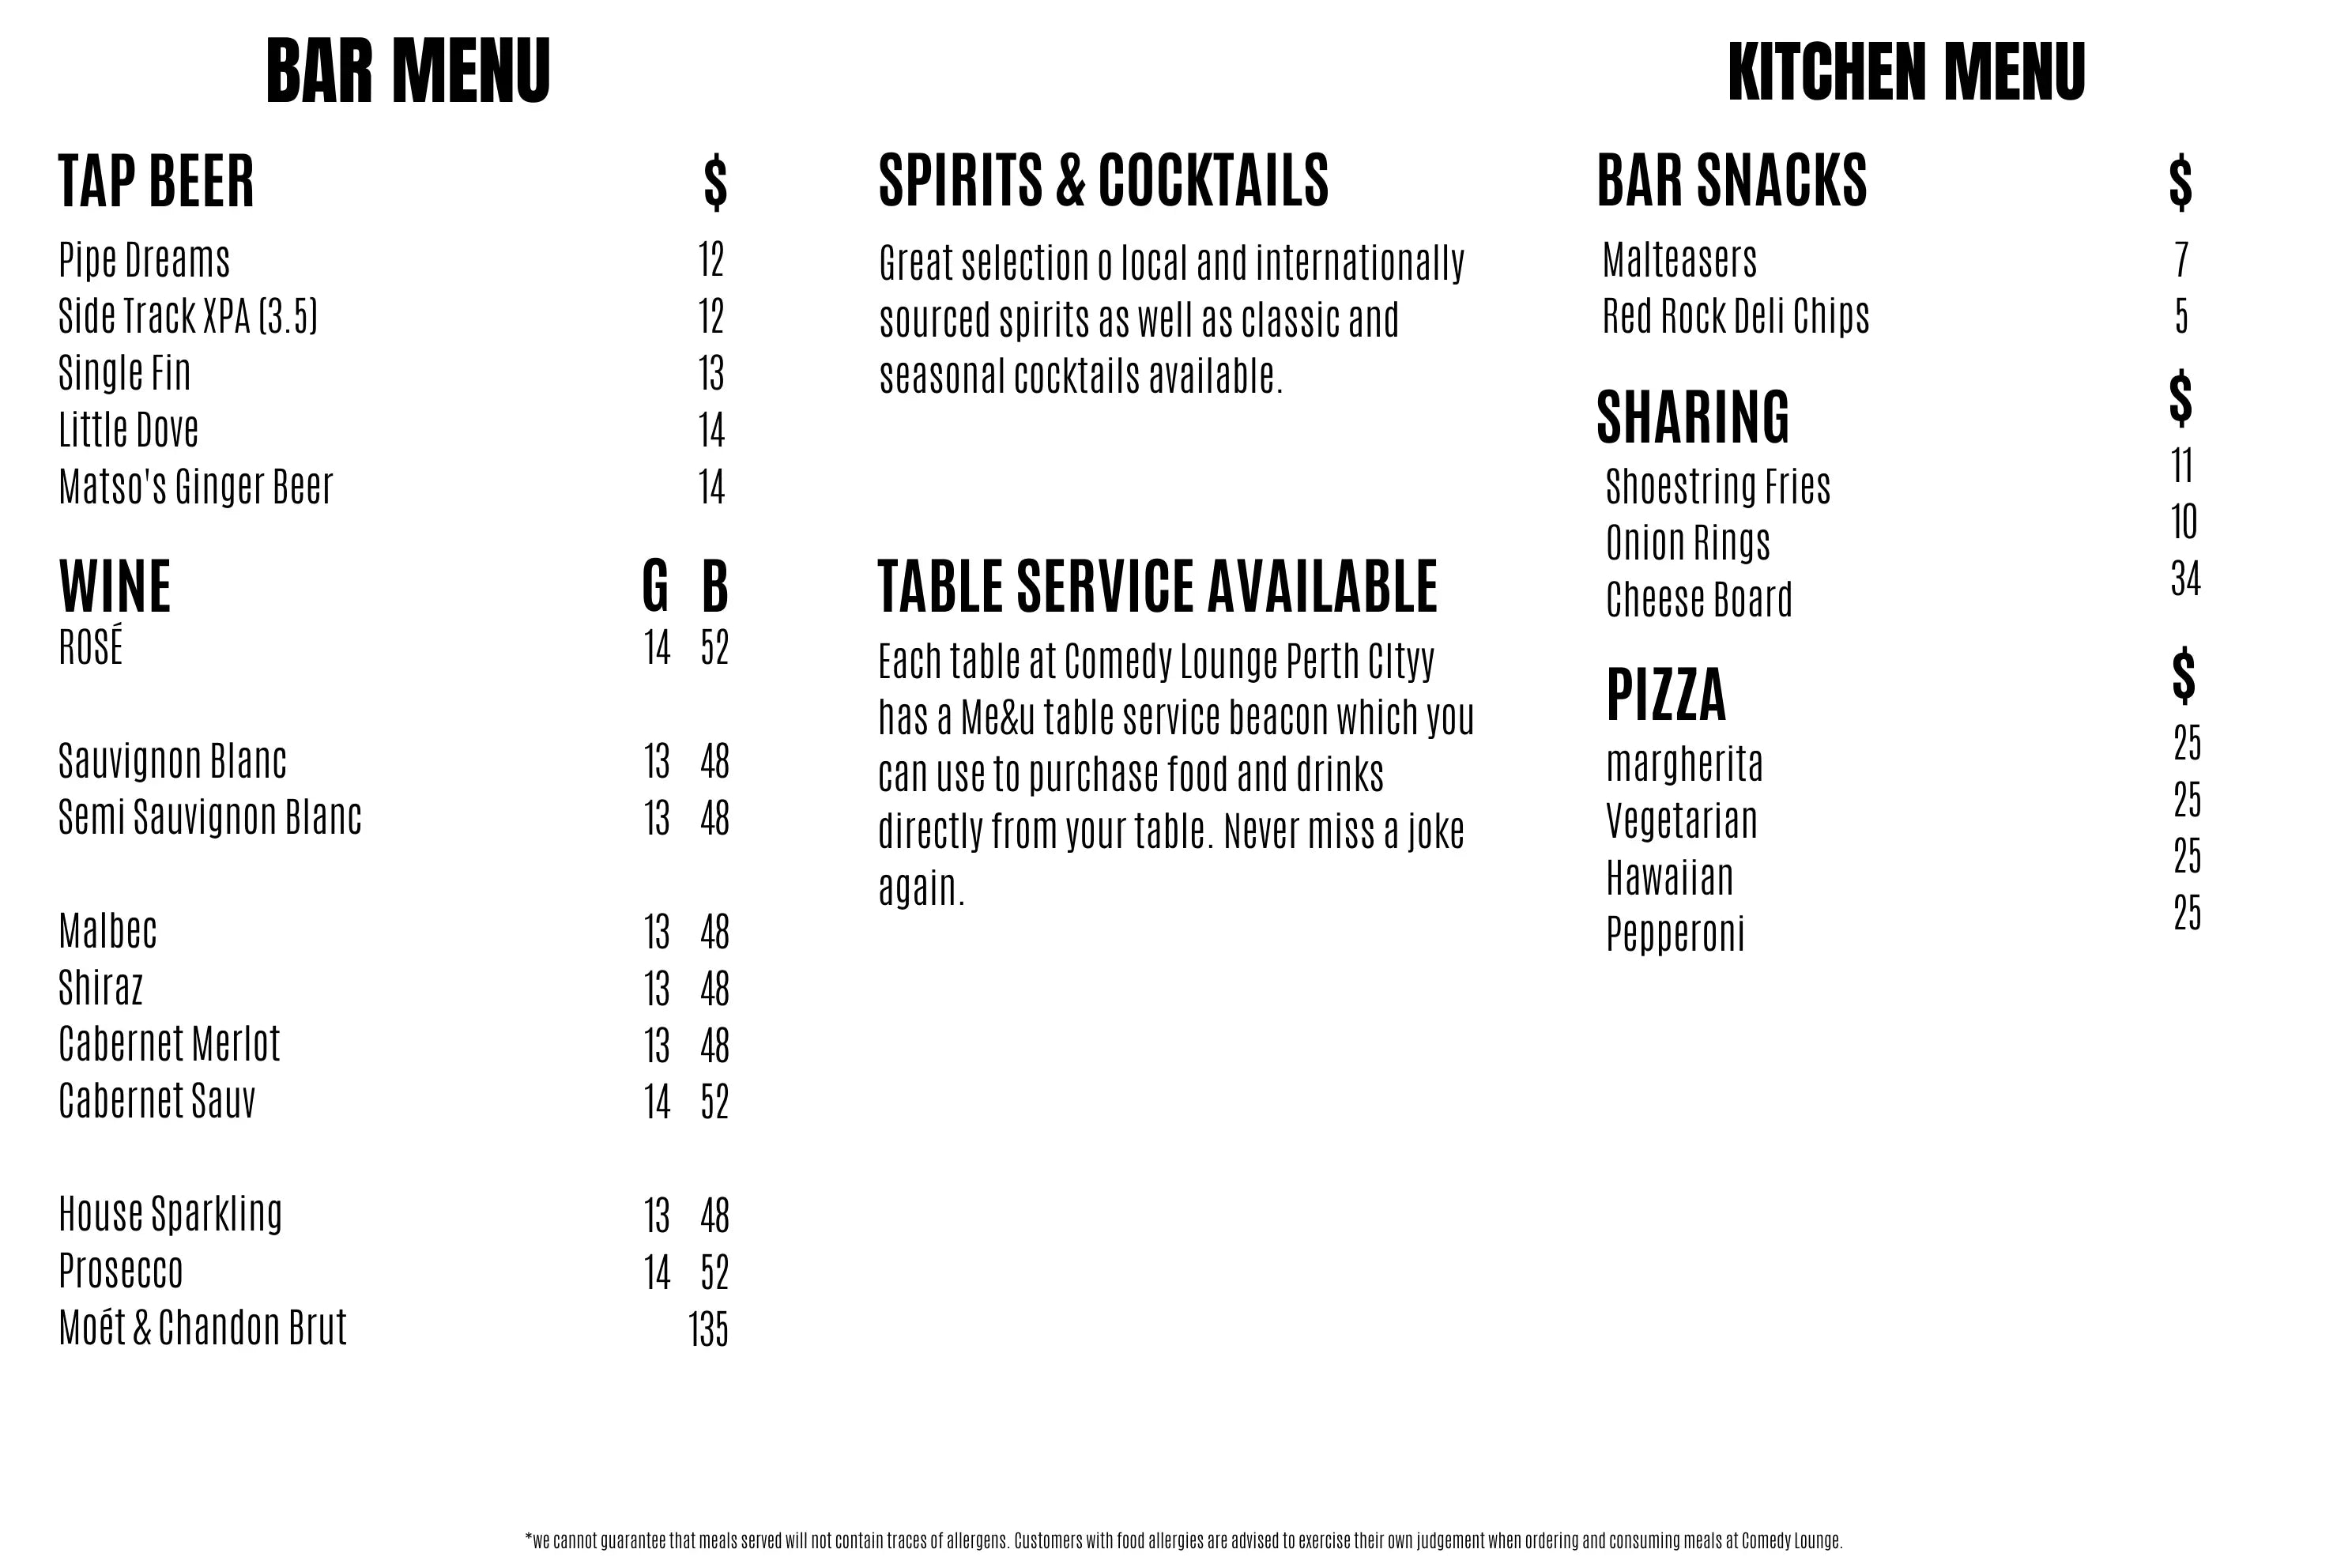 comedy lounge perth city food and drink menu